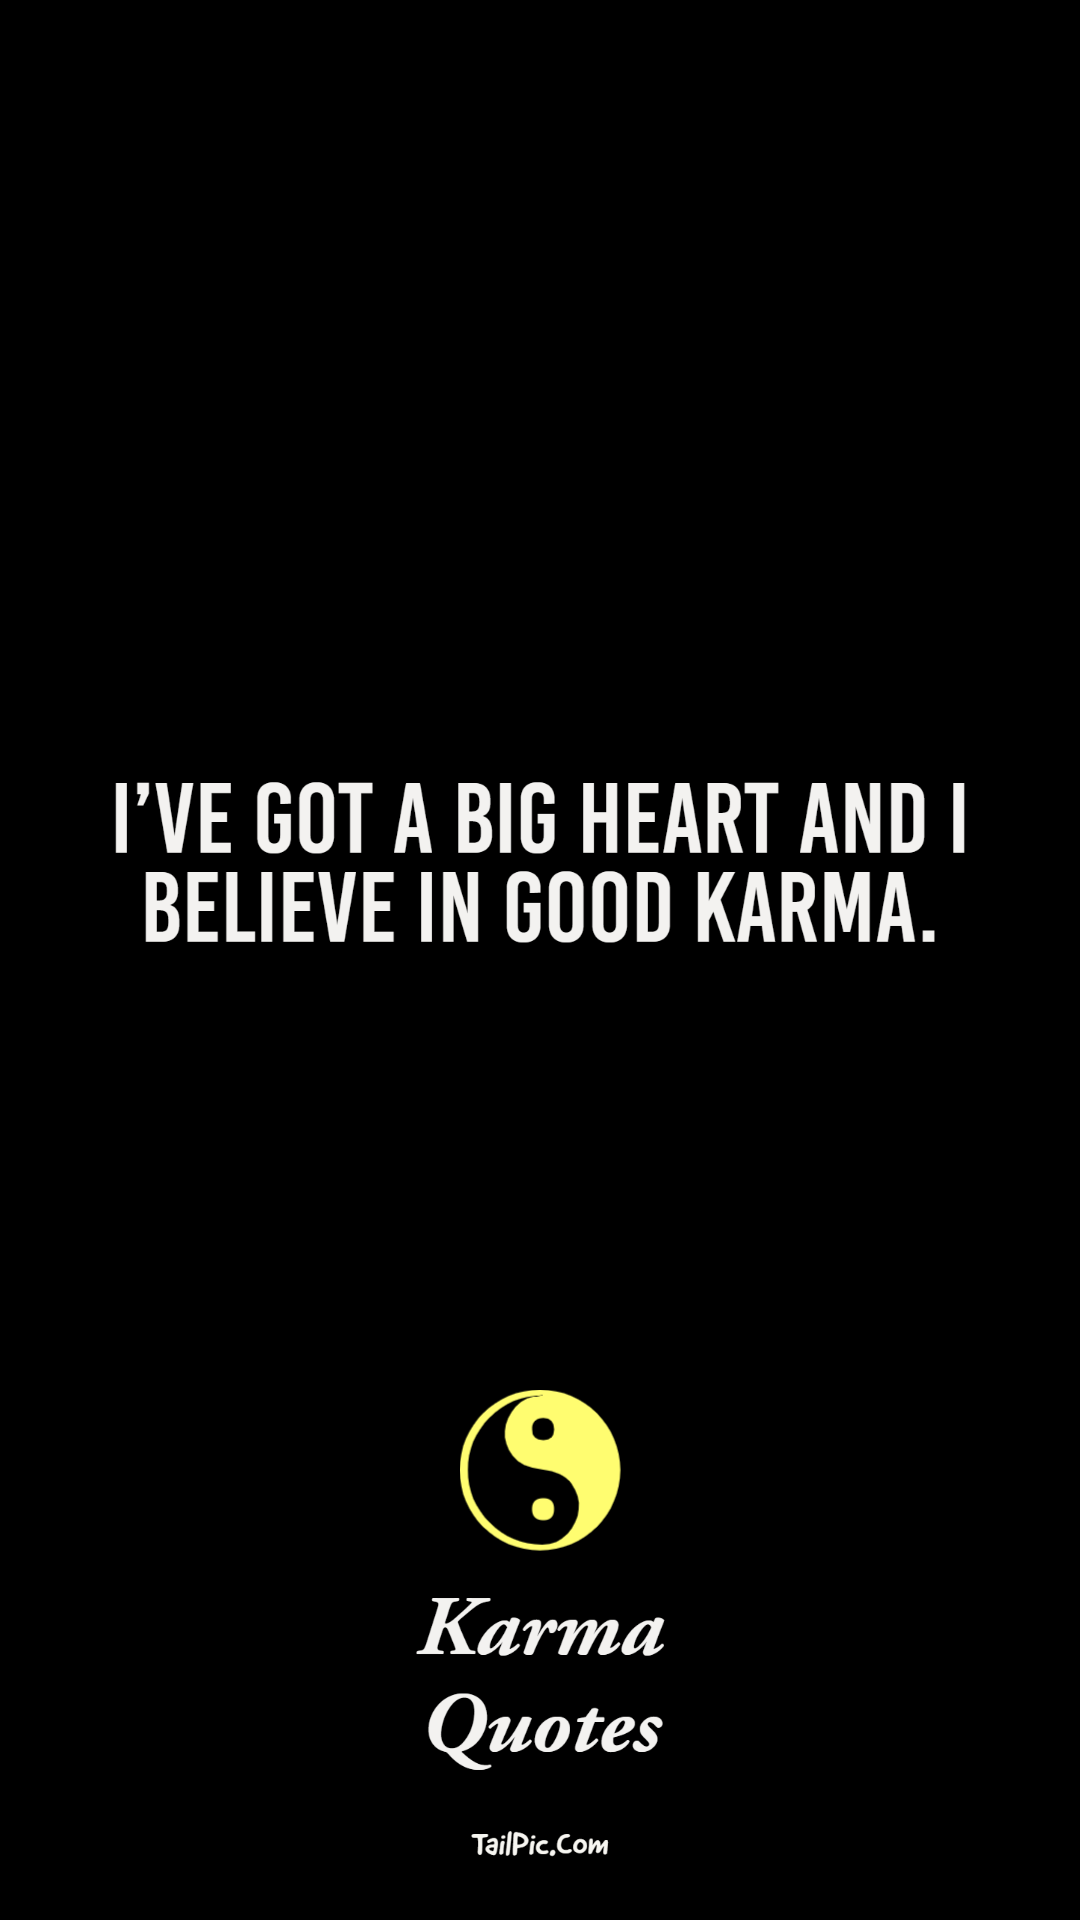 karma quotes that will inspire you to be the bigger